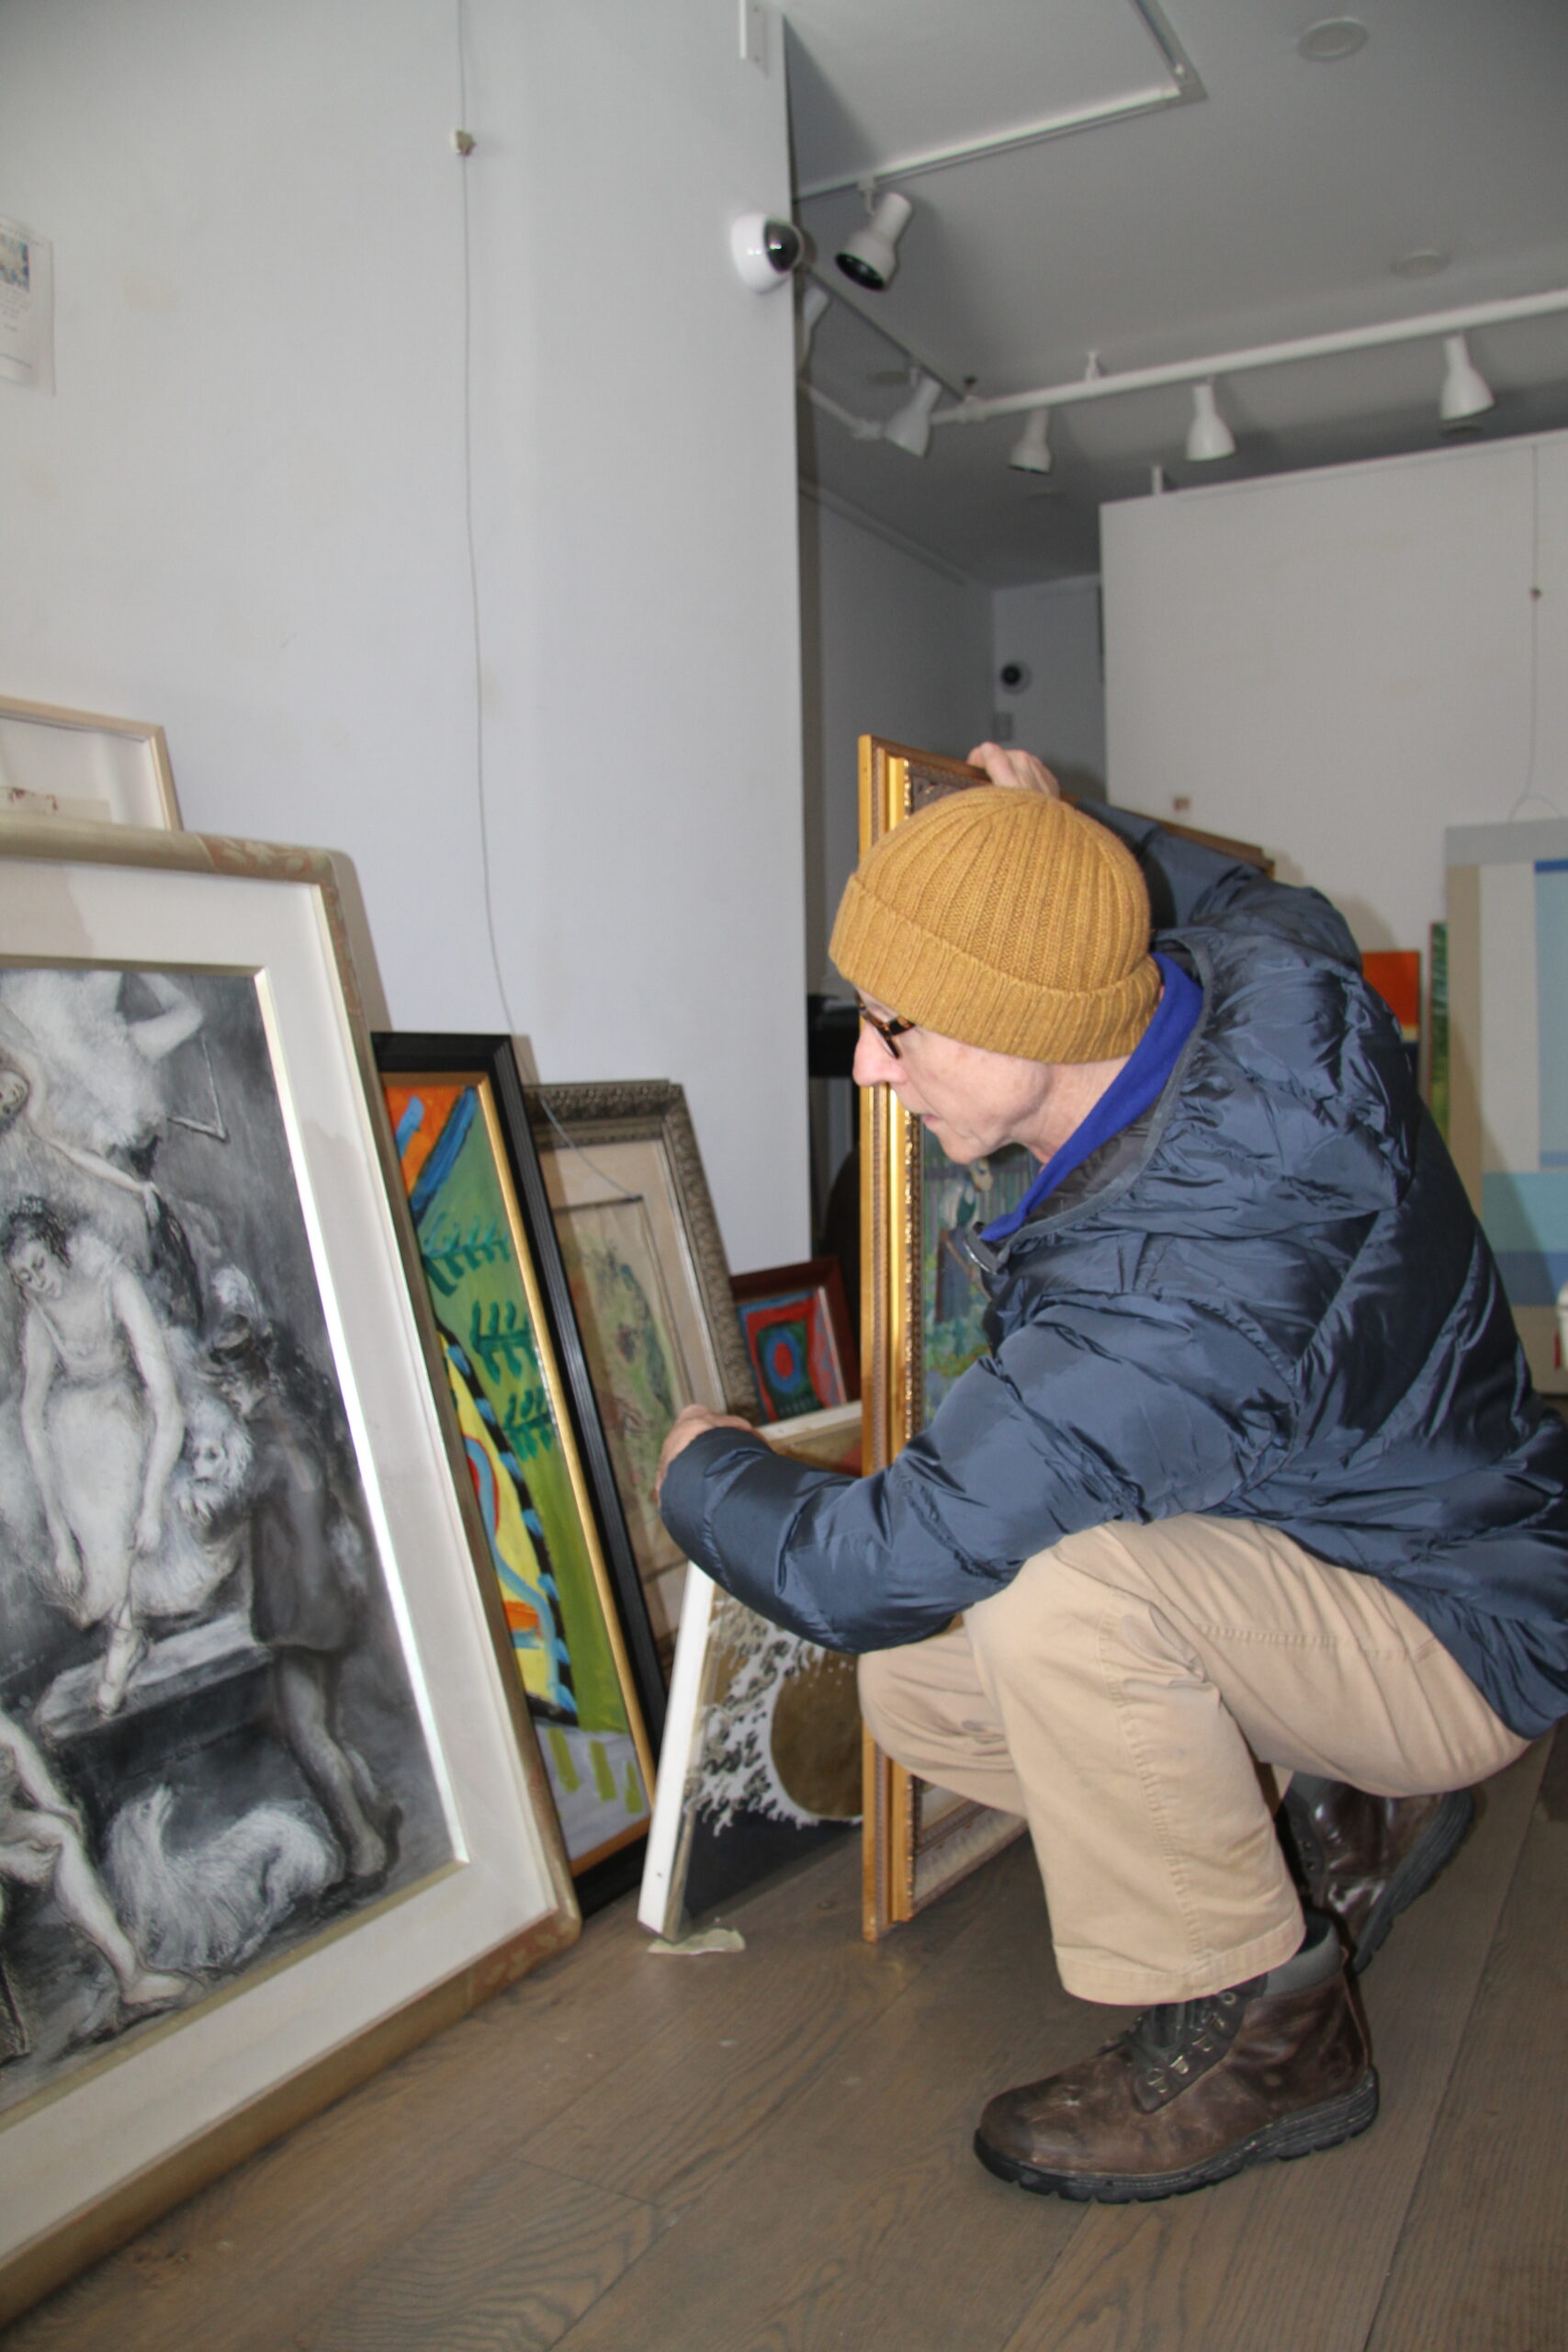 Fine art gallerist Colm Rowan with some of the dozens of valuable and rare paintings that were submerged in the flooded basement of his shop.
Michael Wright